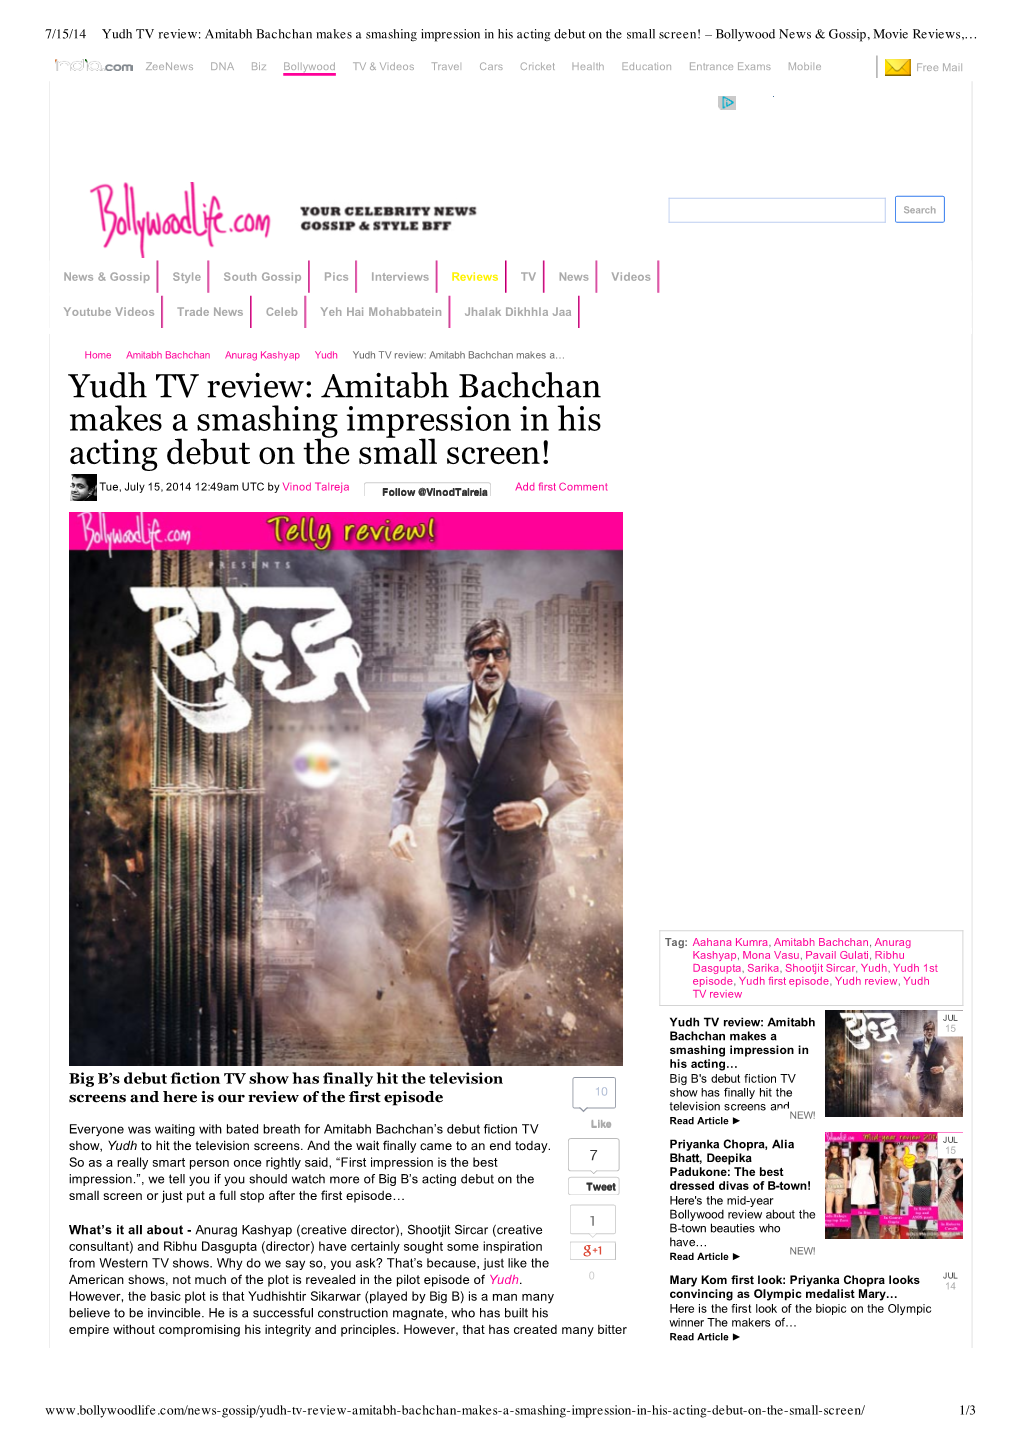 Yudh TV Review: Amitabh Bachchan Makes a Smashing Impression in His Acting Debut on the Small Screen! – Bollywood News & Gossip, Movie Reviews,…